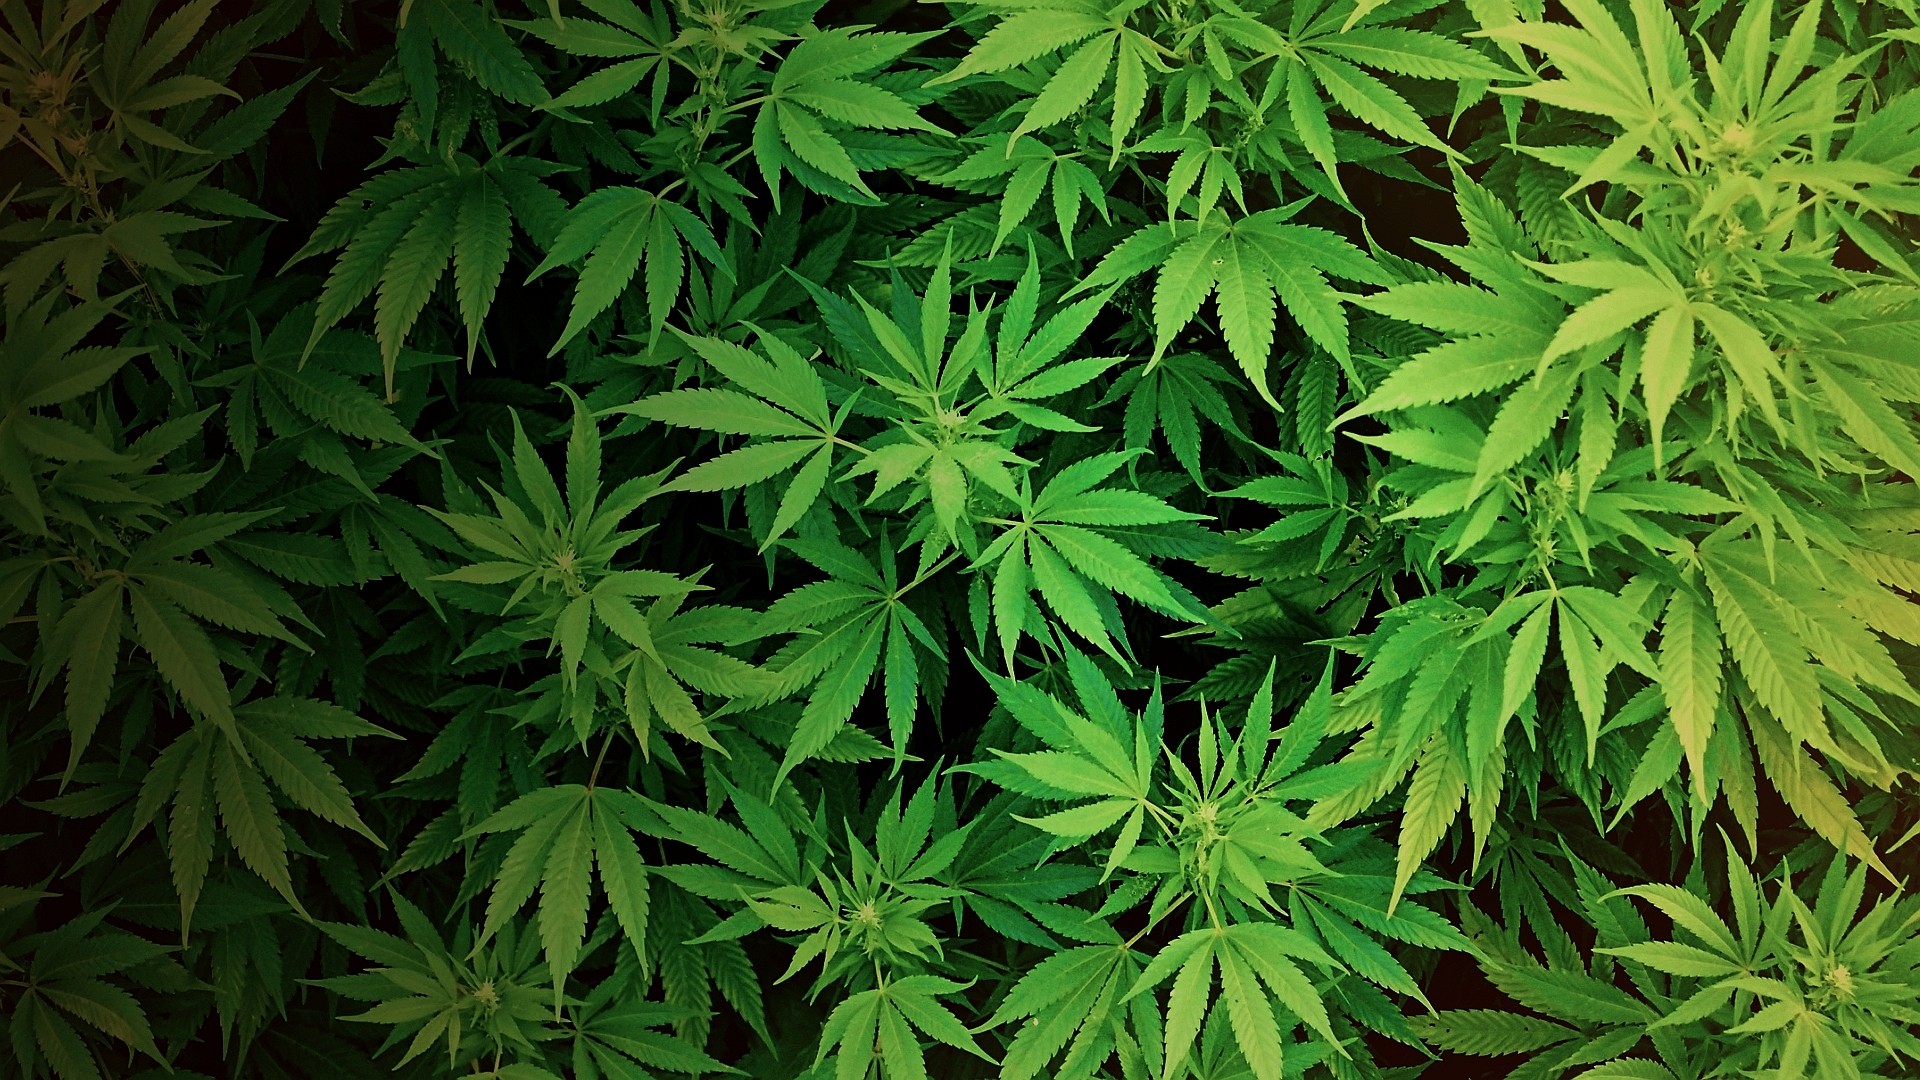 General 1920x1080 cannabis plants drugs nature leaves green